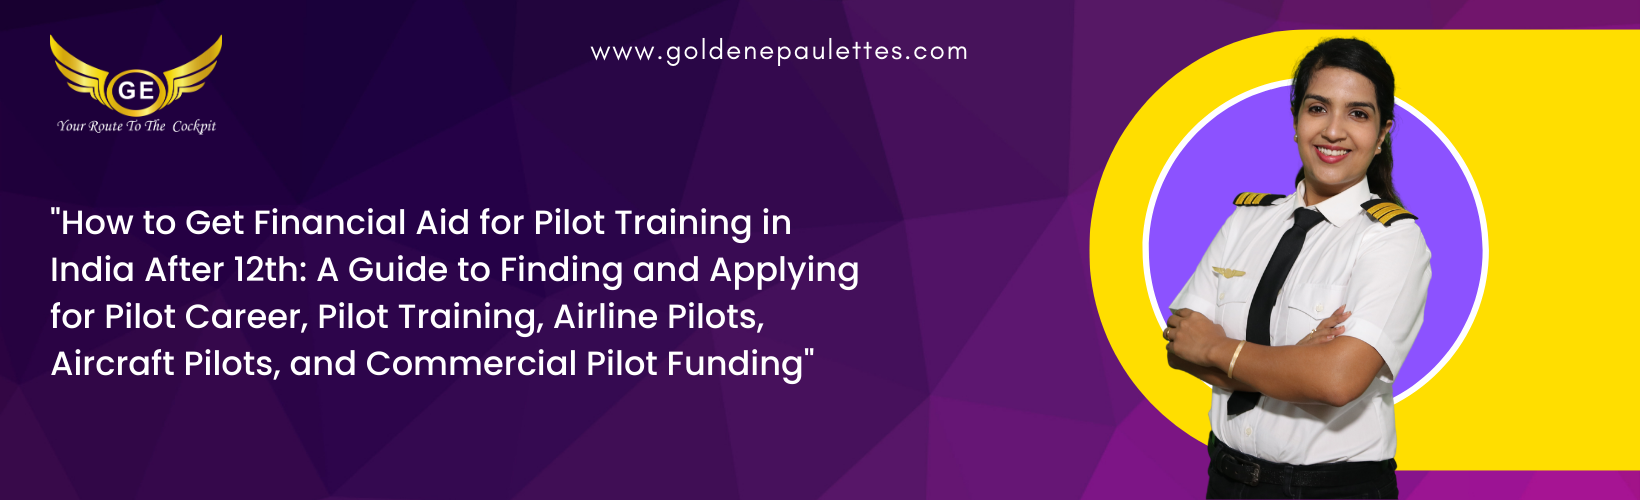 How to Get Financial Aid for Pilot Training in India After 12th